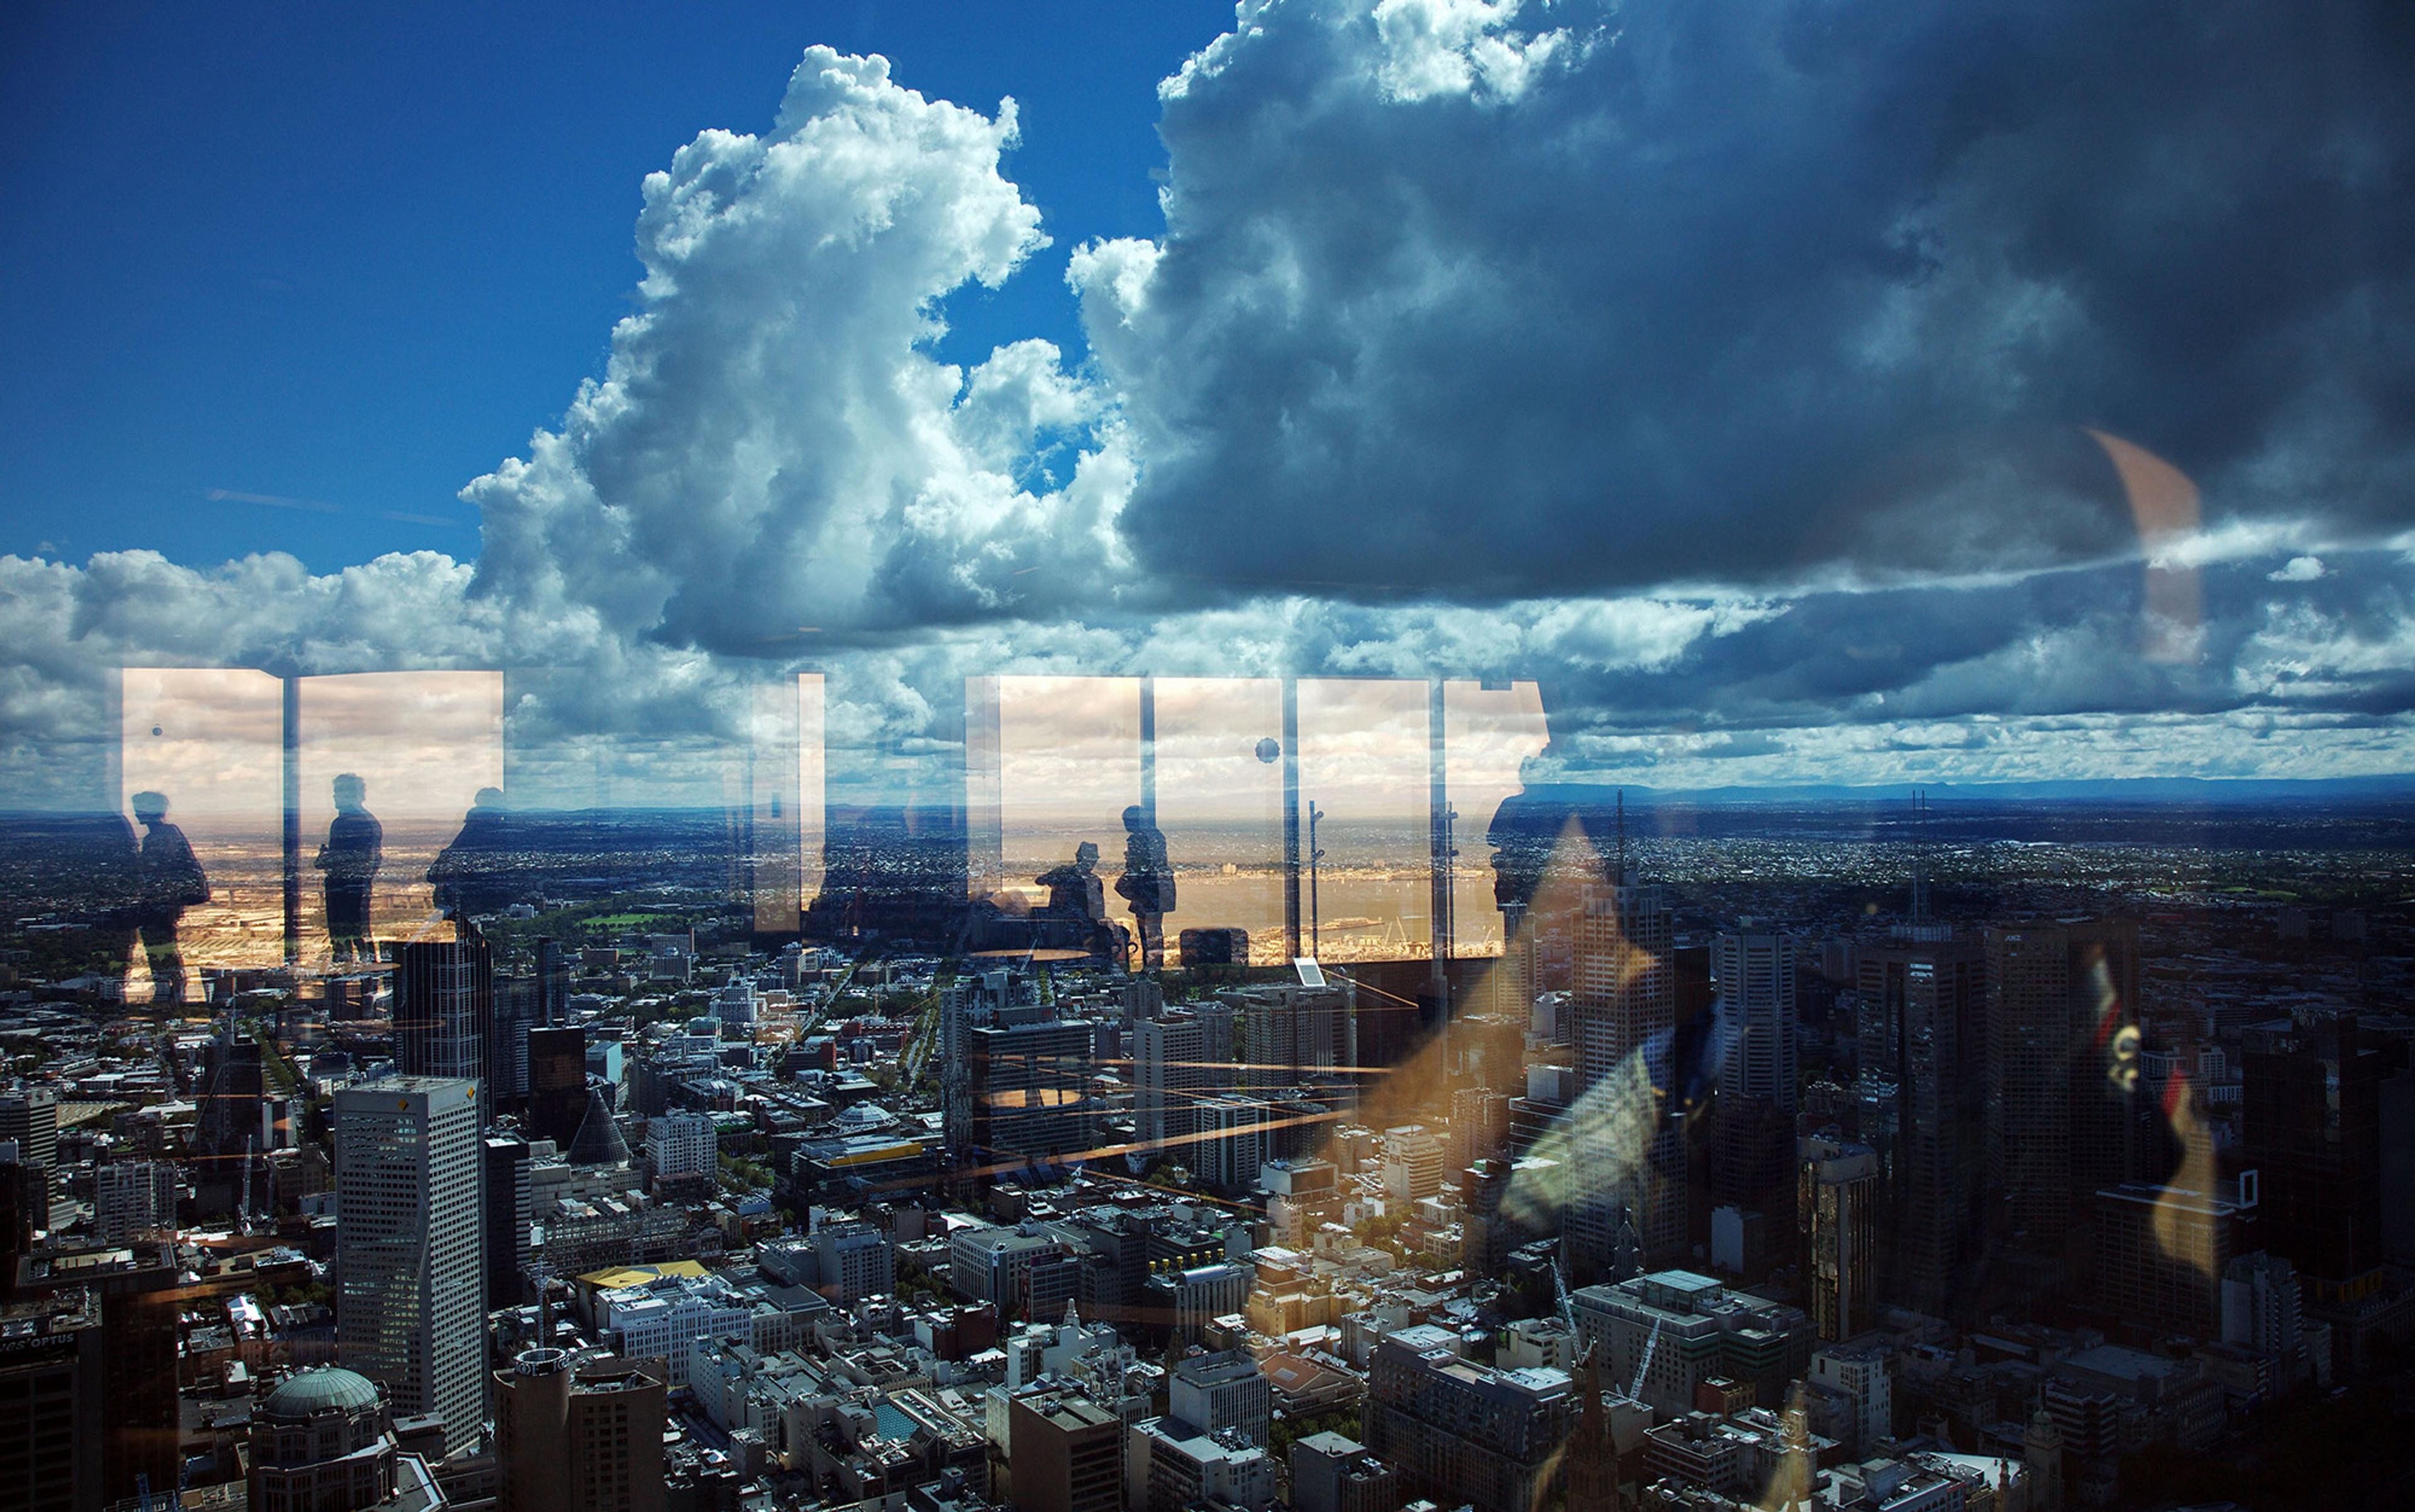 A cityscape view with reflections of people on windows and a dramatic cloudy sky in the background.